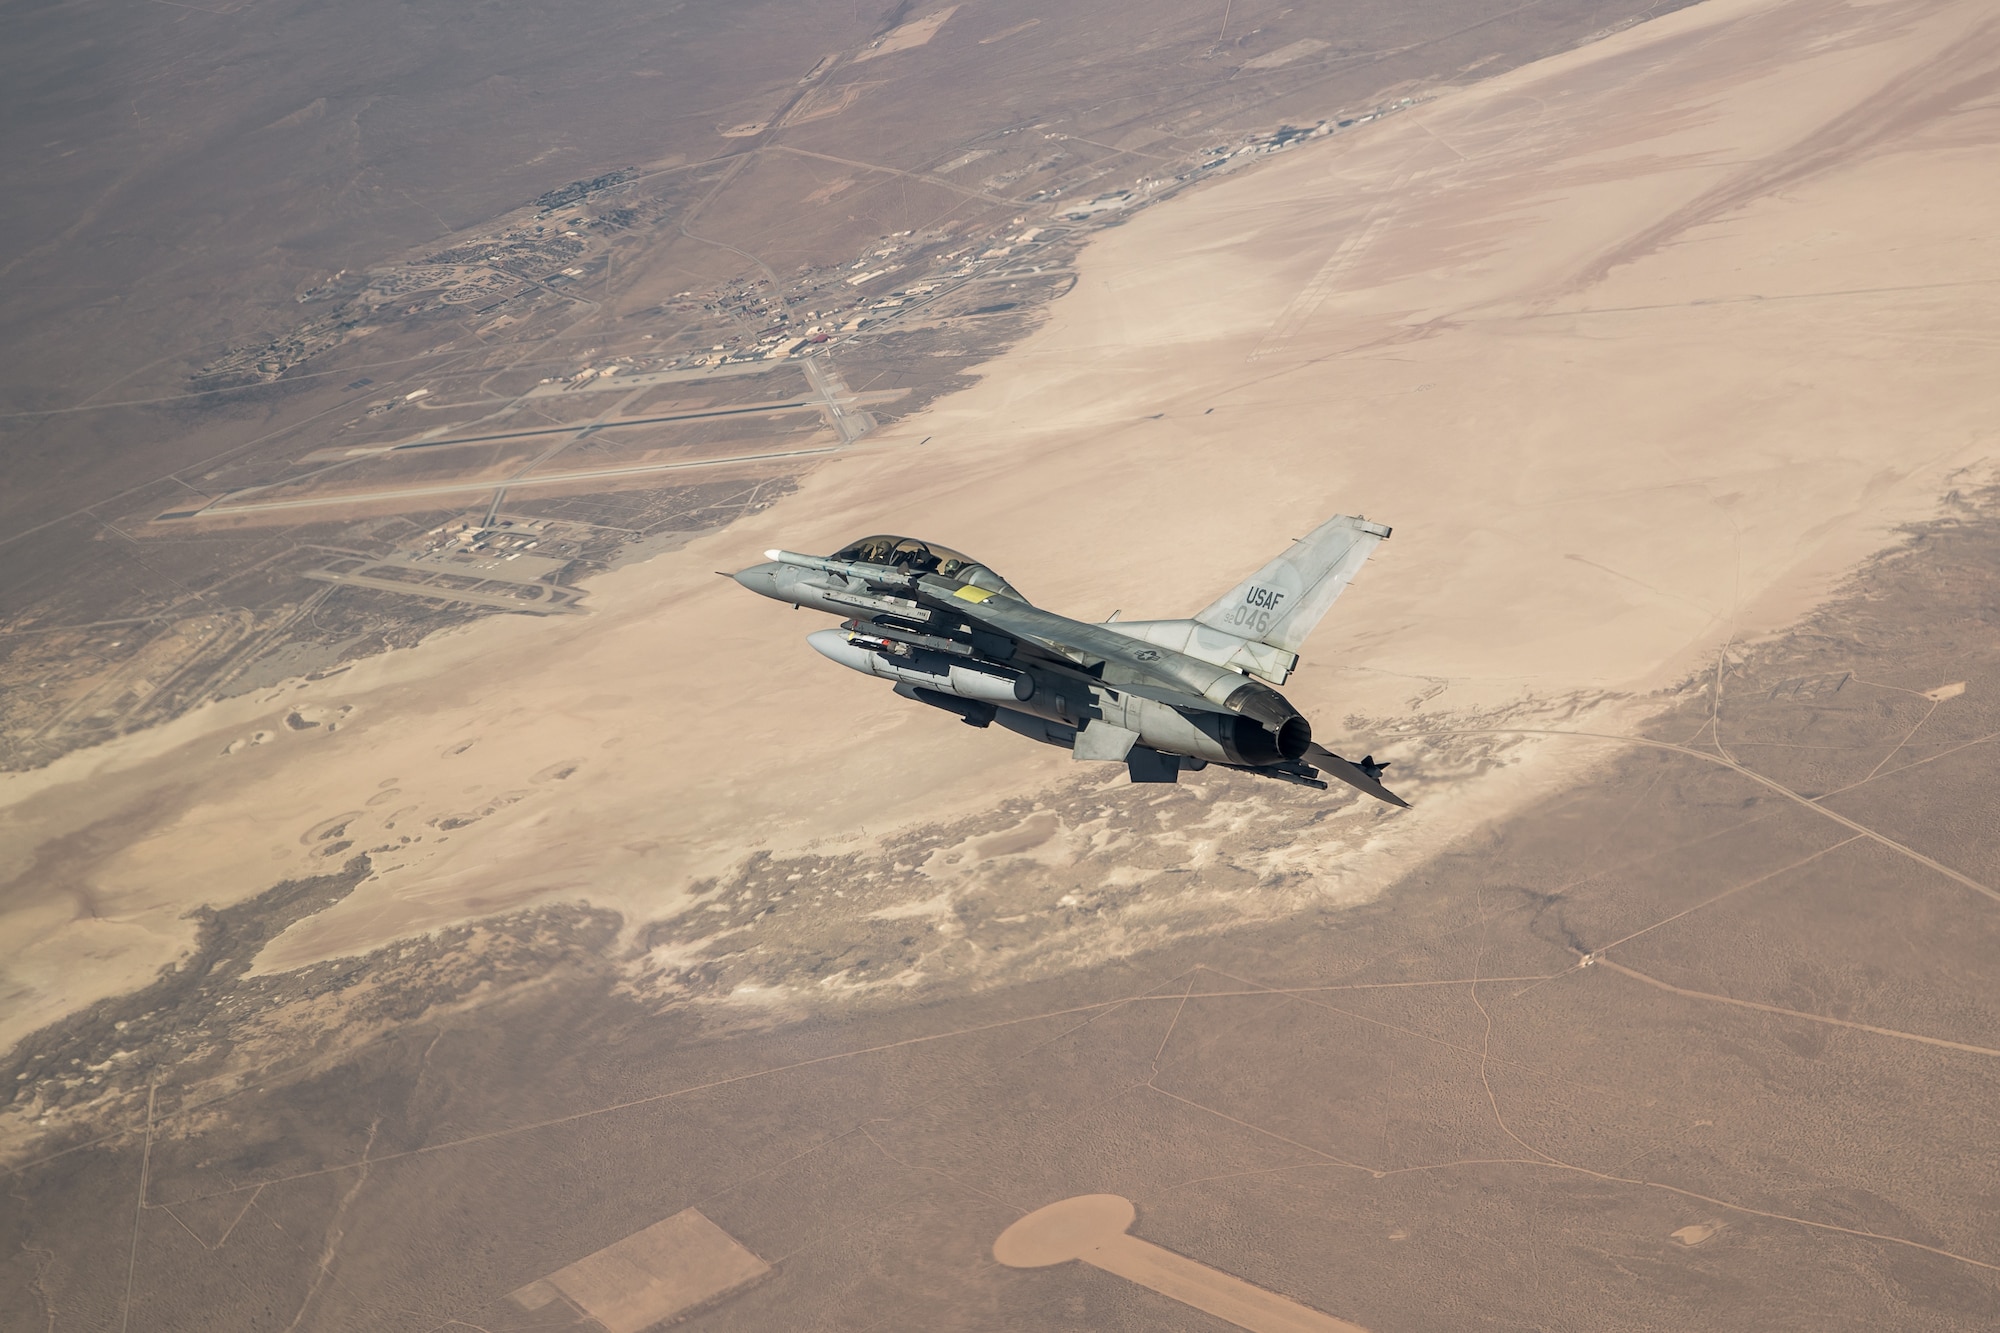 An F-16 assigned to the 416th Flight Test Squadron flies into position over the Precision Impact Range Area on Edwards Air Force Base, California, Feb. 26. The successful drop test was in support of the Korea F-16 Update Program. The ROKAF currently operates 133 KF-16C/D Block 50/52 fighter aircraft, all of which will undergo extensive modernization and upgrades as part of the comprehensive improvement program. Lockheed Martin was awarded a $1.2 billion contract to retrofit the 133 KF-16s and upgrade them to the advanced F-16V configuration, which is the latest technologically and most advanced version of the fourth generation fighter jet. (Air Force photo by Ethan Wagner)